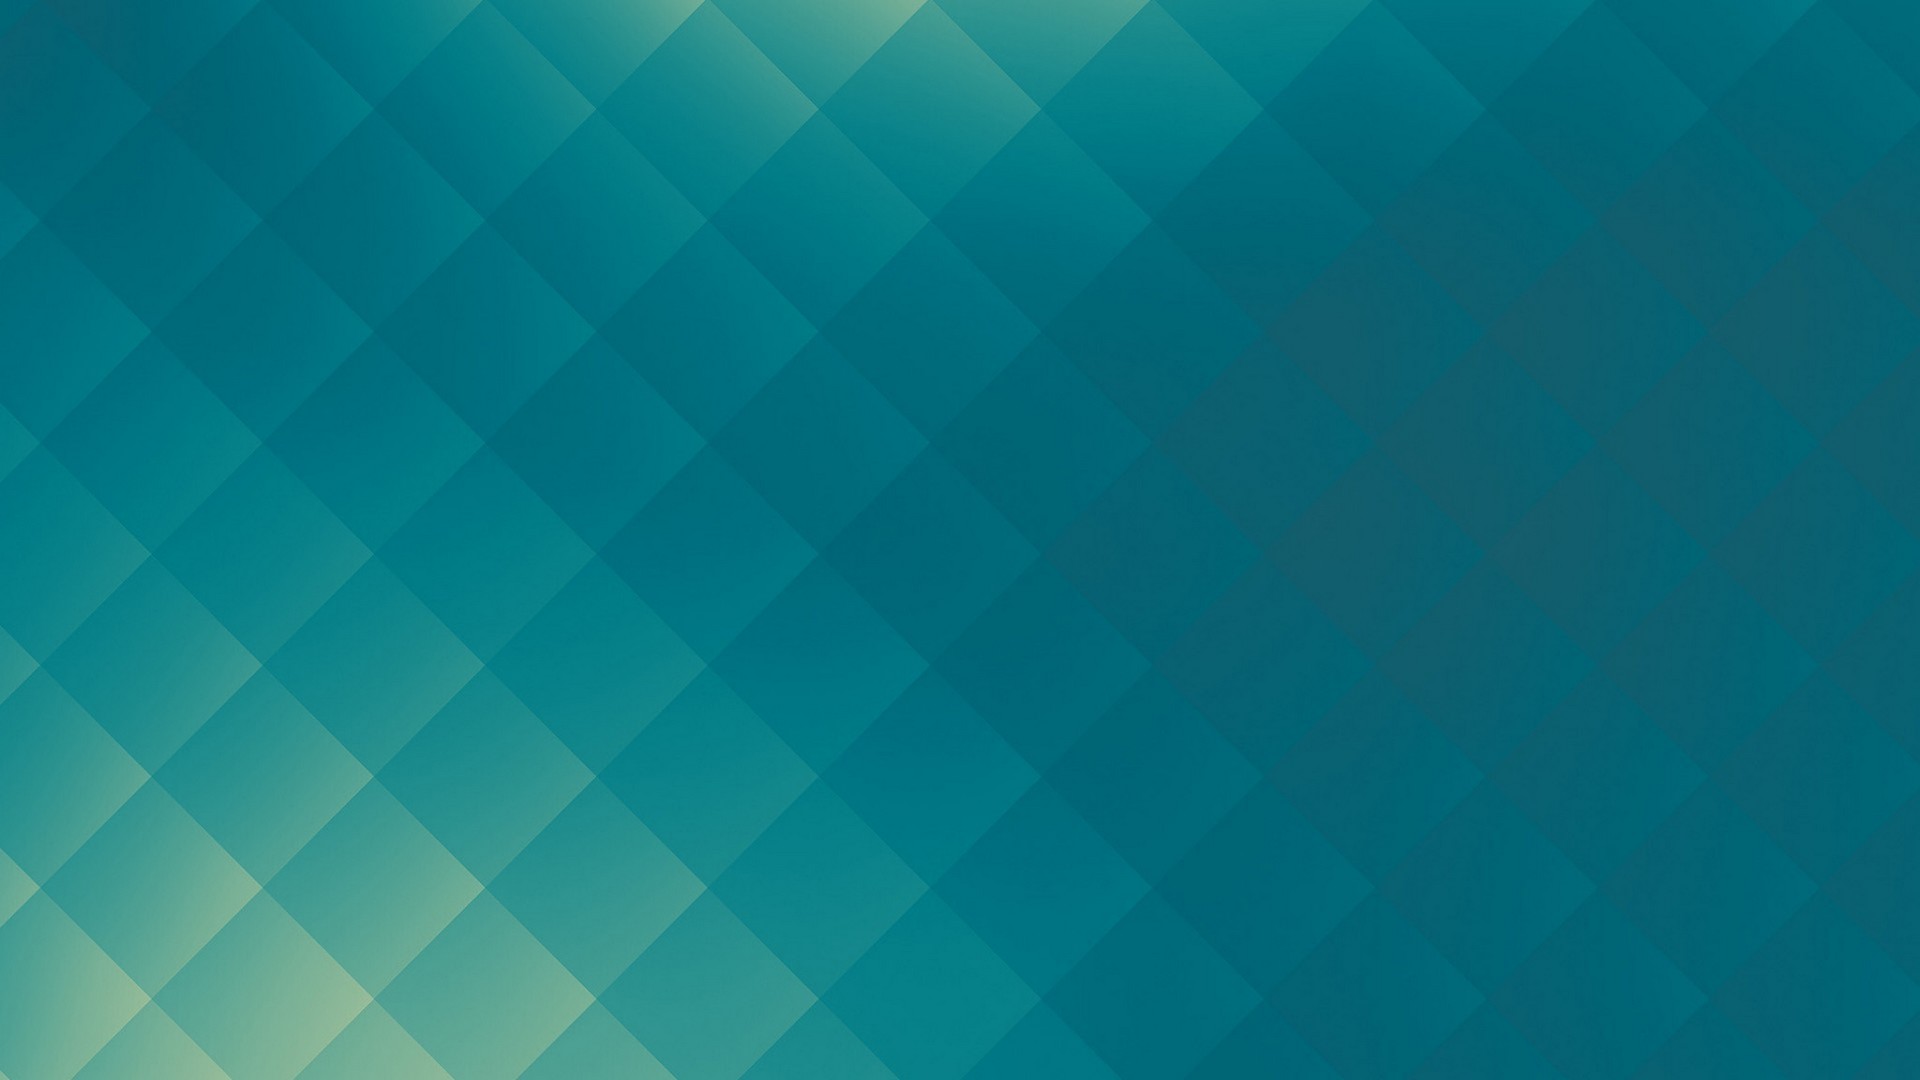 Teal Blue Desktop Backgrounds HD with resolution 1920X1080 pixel. You can use this wallpaper as background for your desktop Computer Screensavers, Android or iPhone smartphones